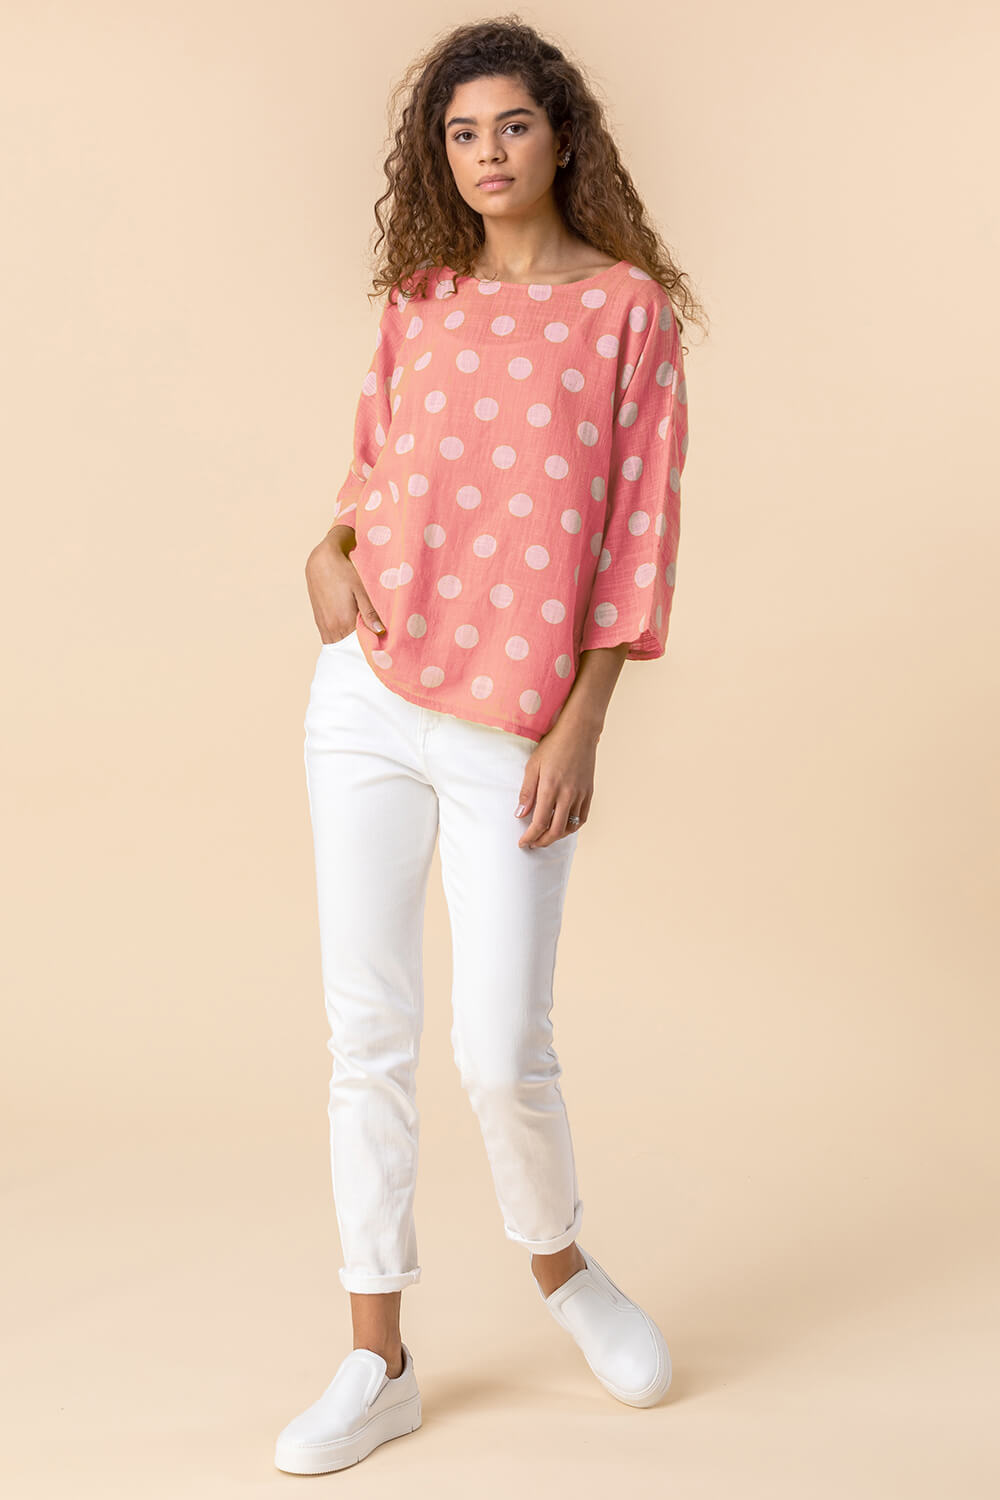 CORAL Spot Print 3/4 Sleeve Top, Image 3 of 4